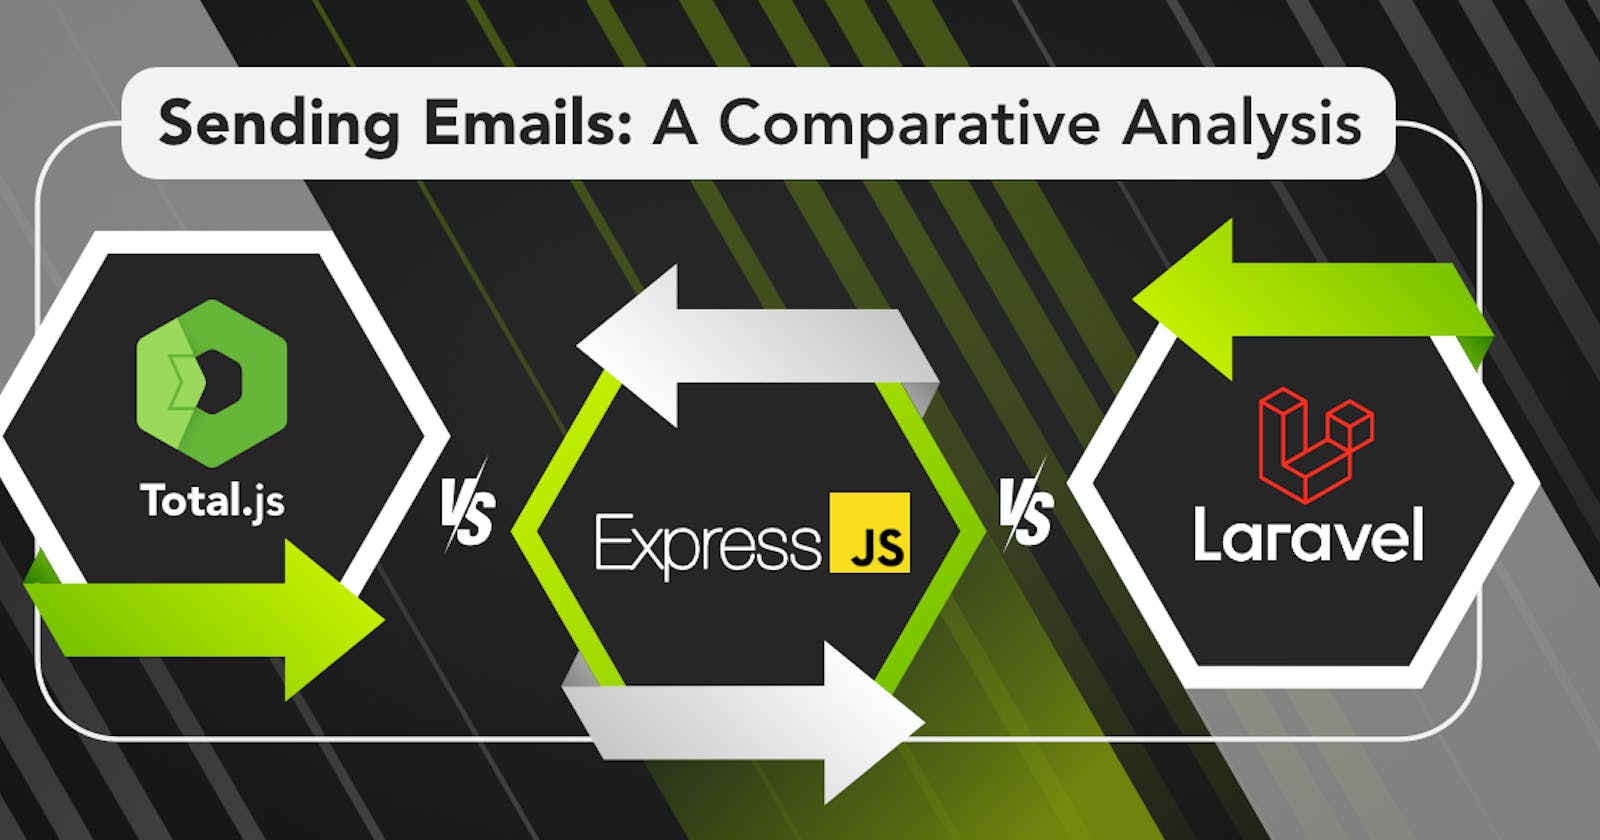 Sending Emails: A Comparative Analysis of Total.js, Express.js, and Laravel